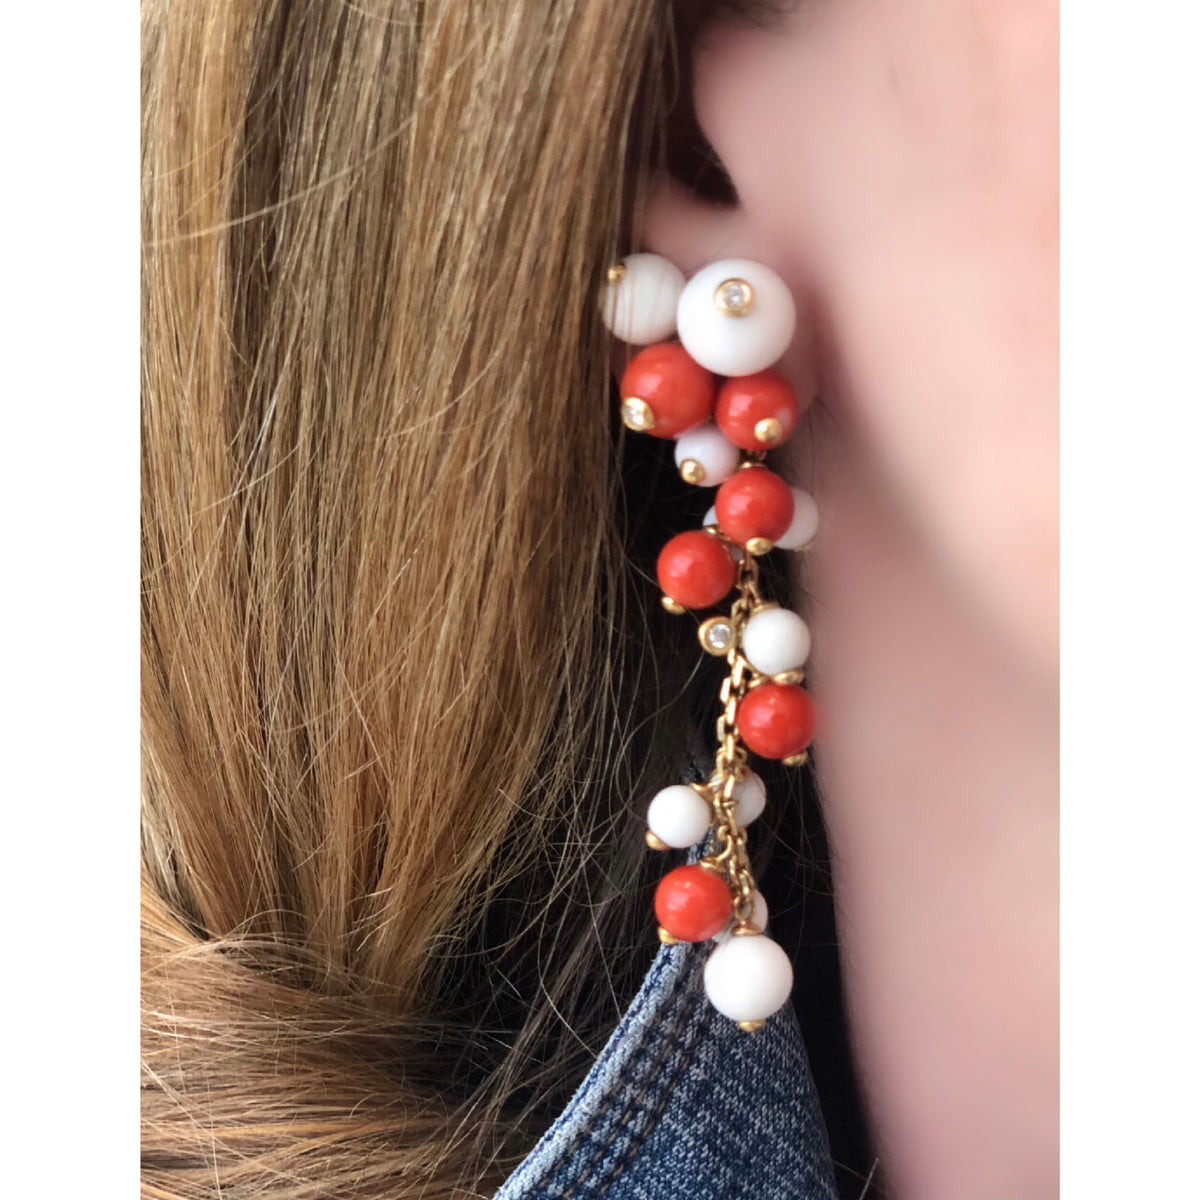 talian Coral, White Agate Beads and Diamonds Dangling Earrings in 18 Karat Gold model view